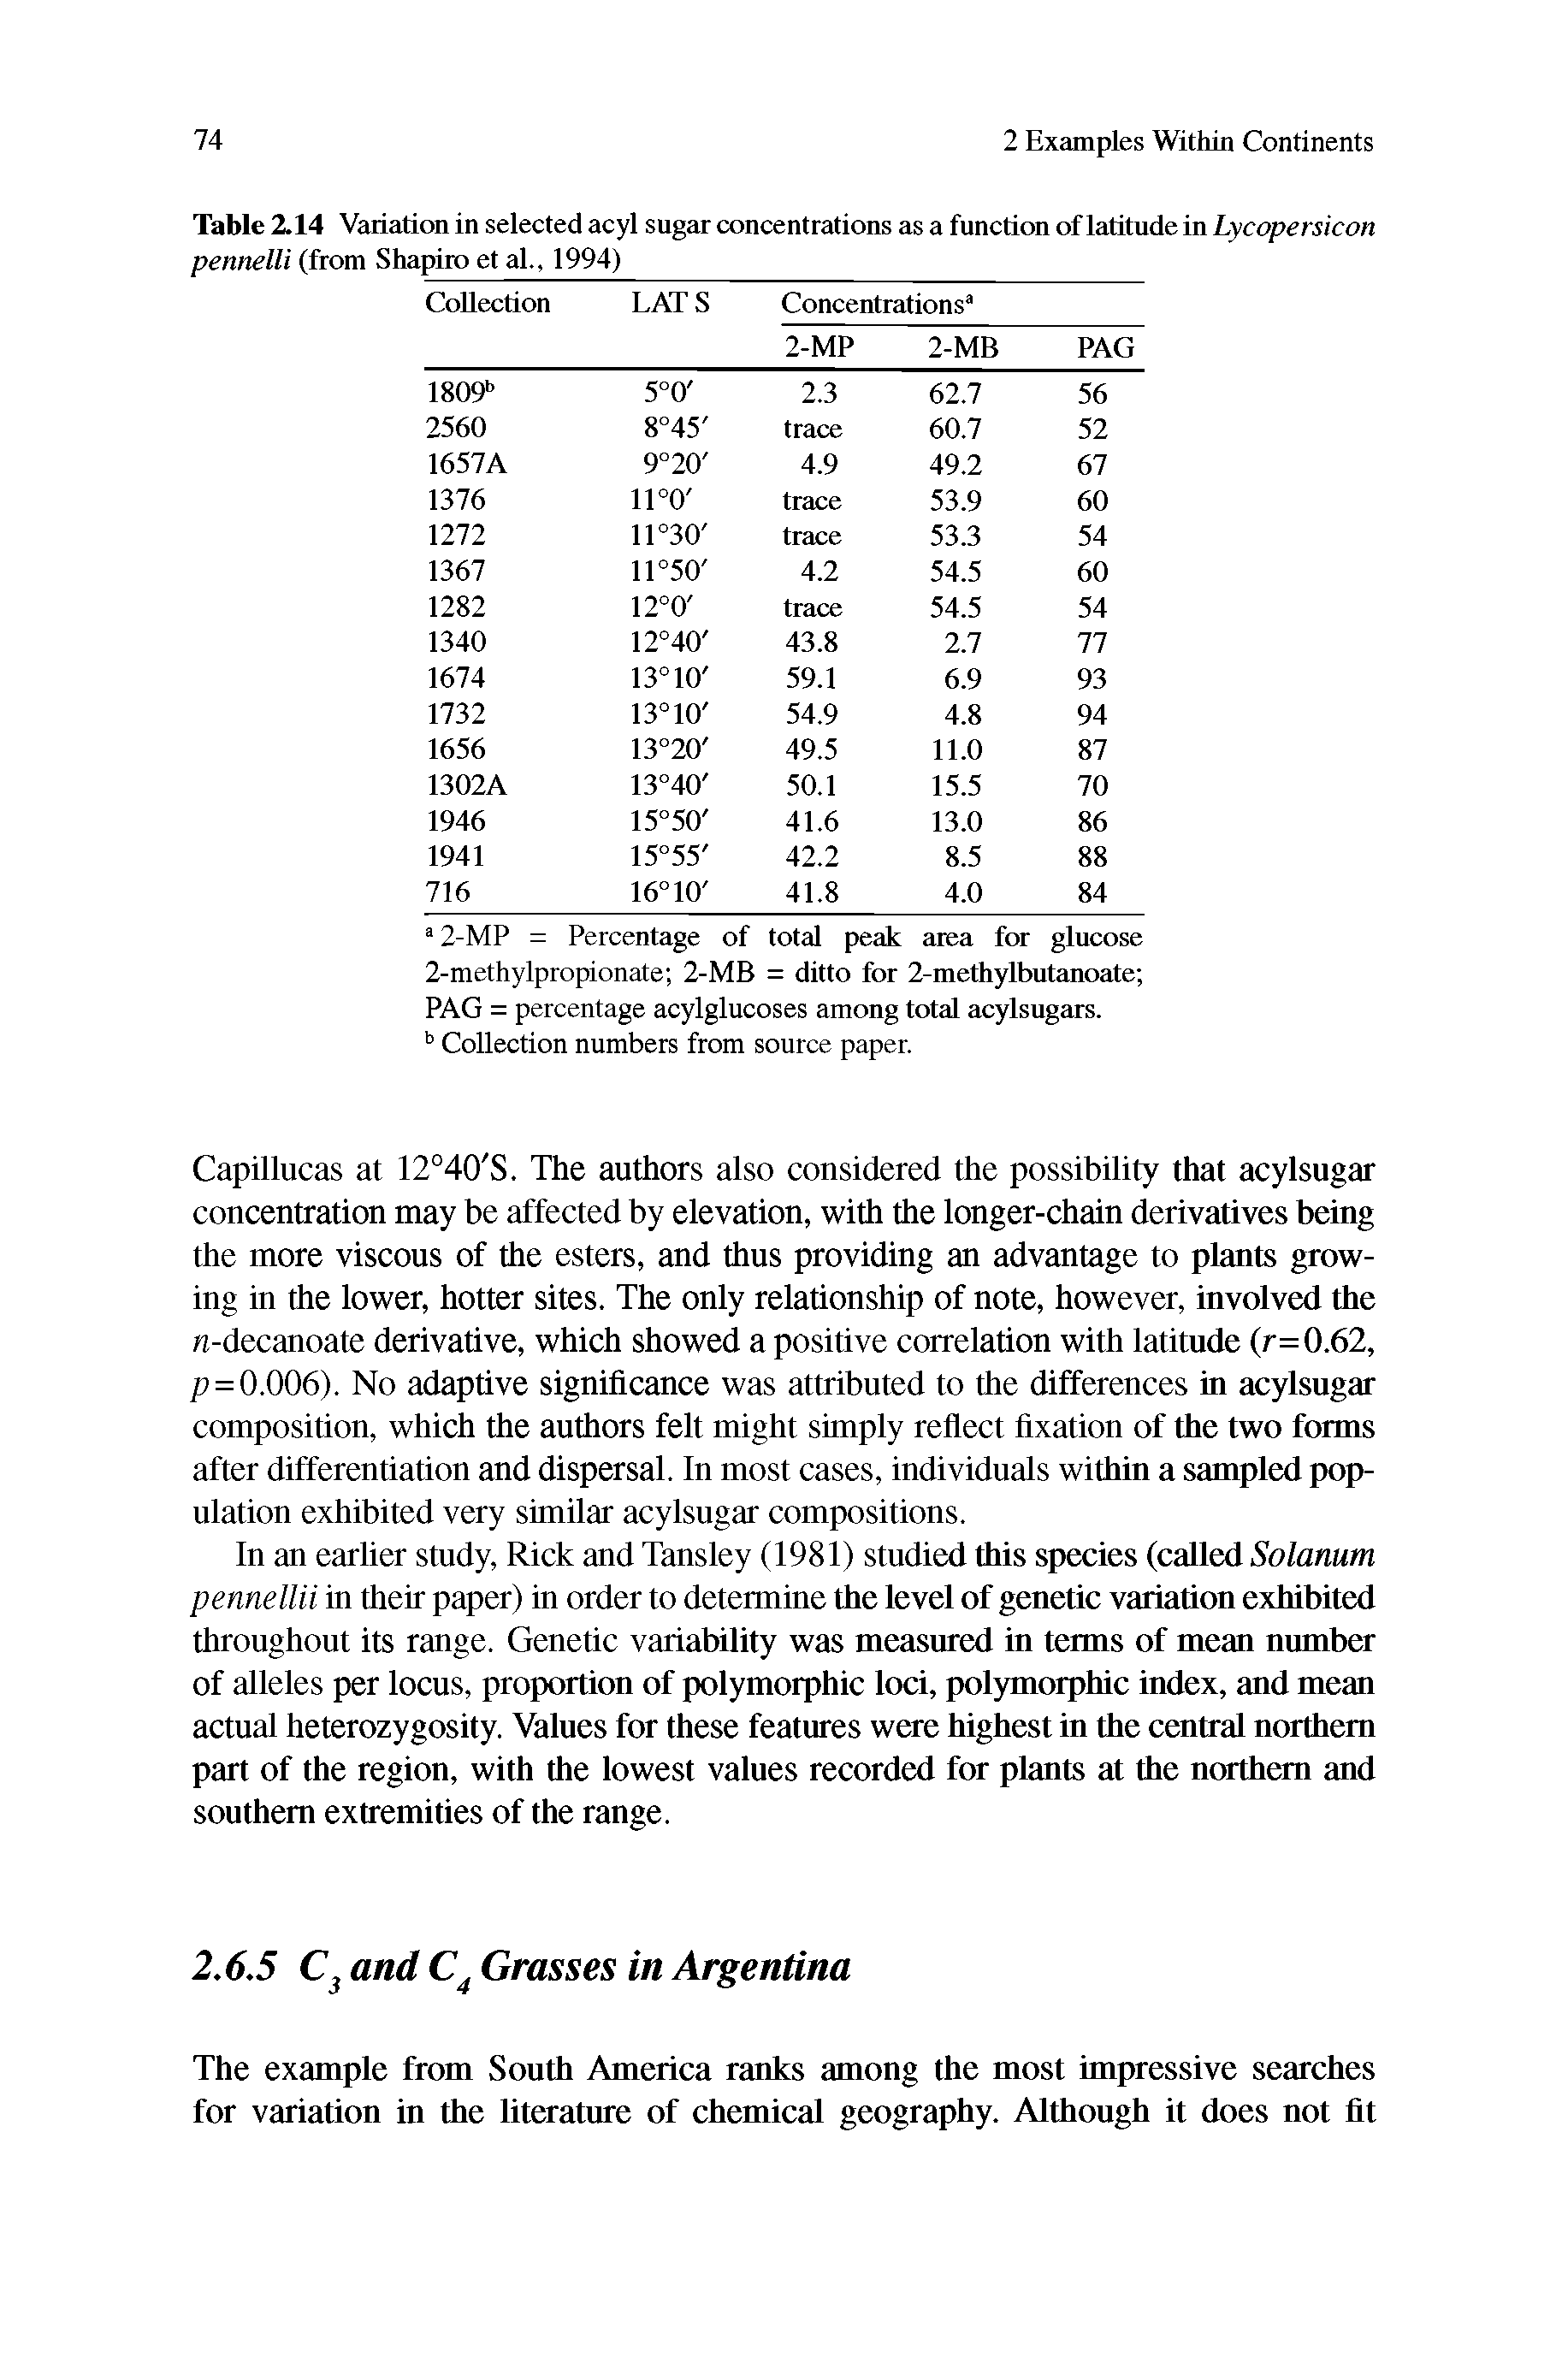 Table Z14 Variation in selected acyl sugar concentrations as a function of latitude in Lycopersicon pennelli (from Shapiro et al., 1994)...